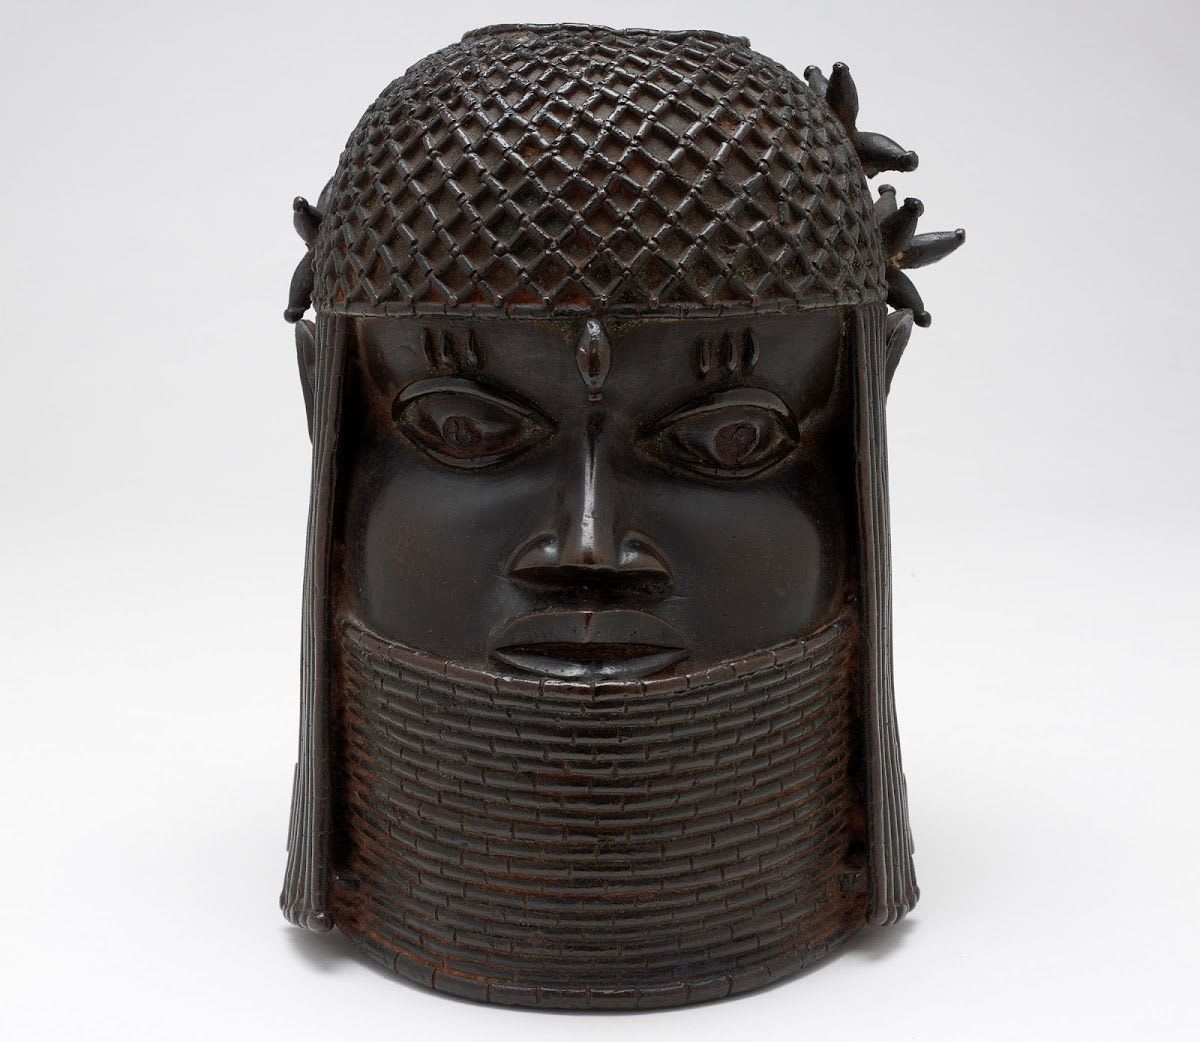 A London museum could be the next institution to repatriate Benin Bronzes: